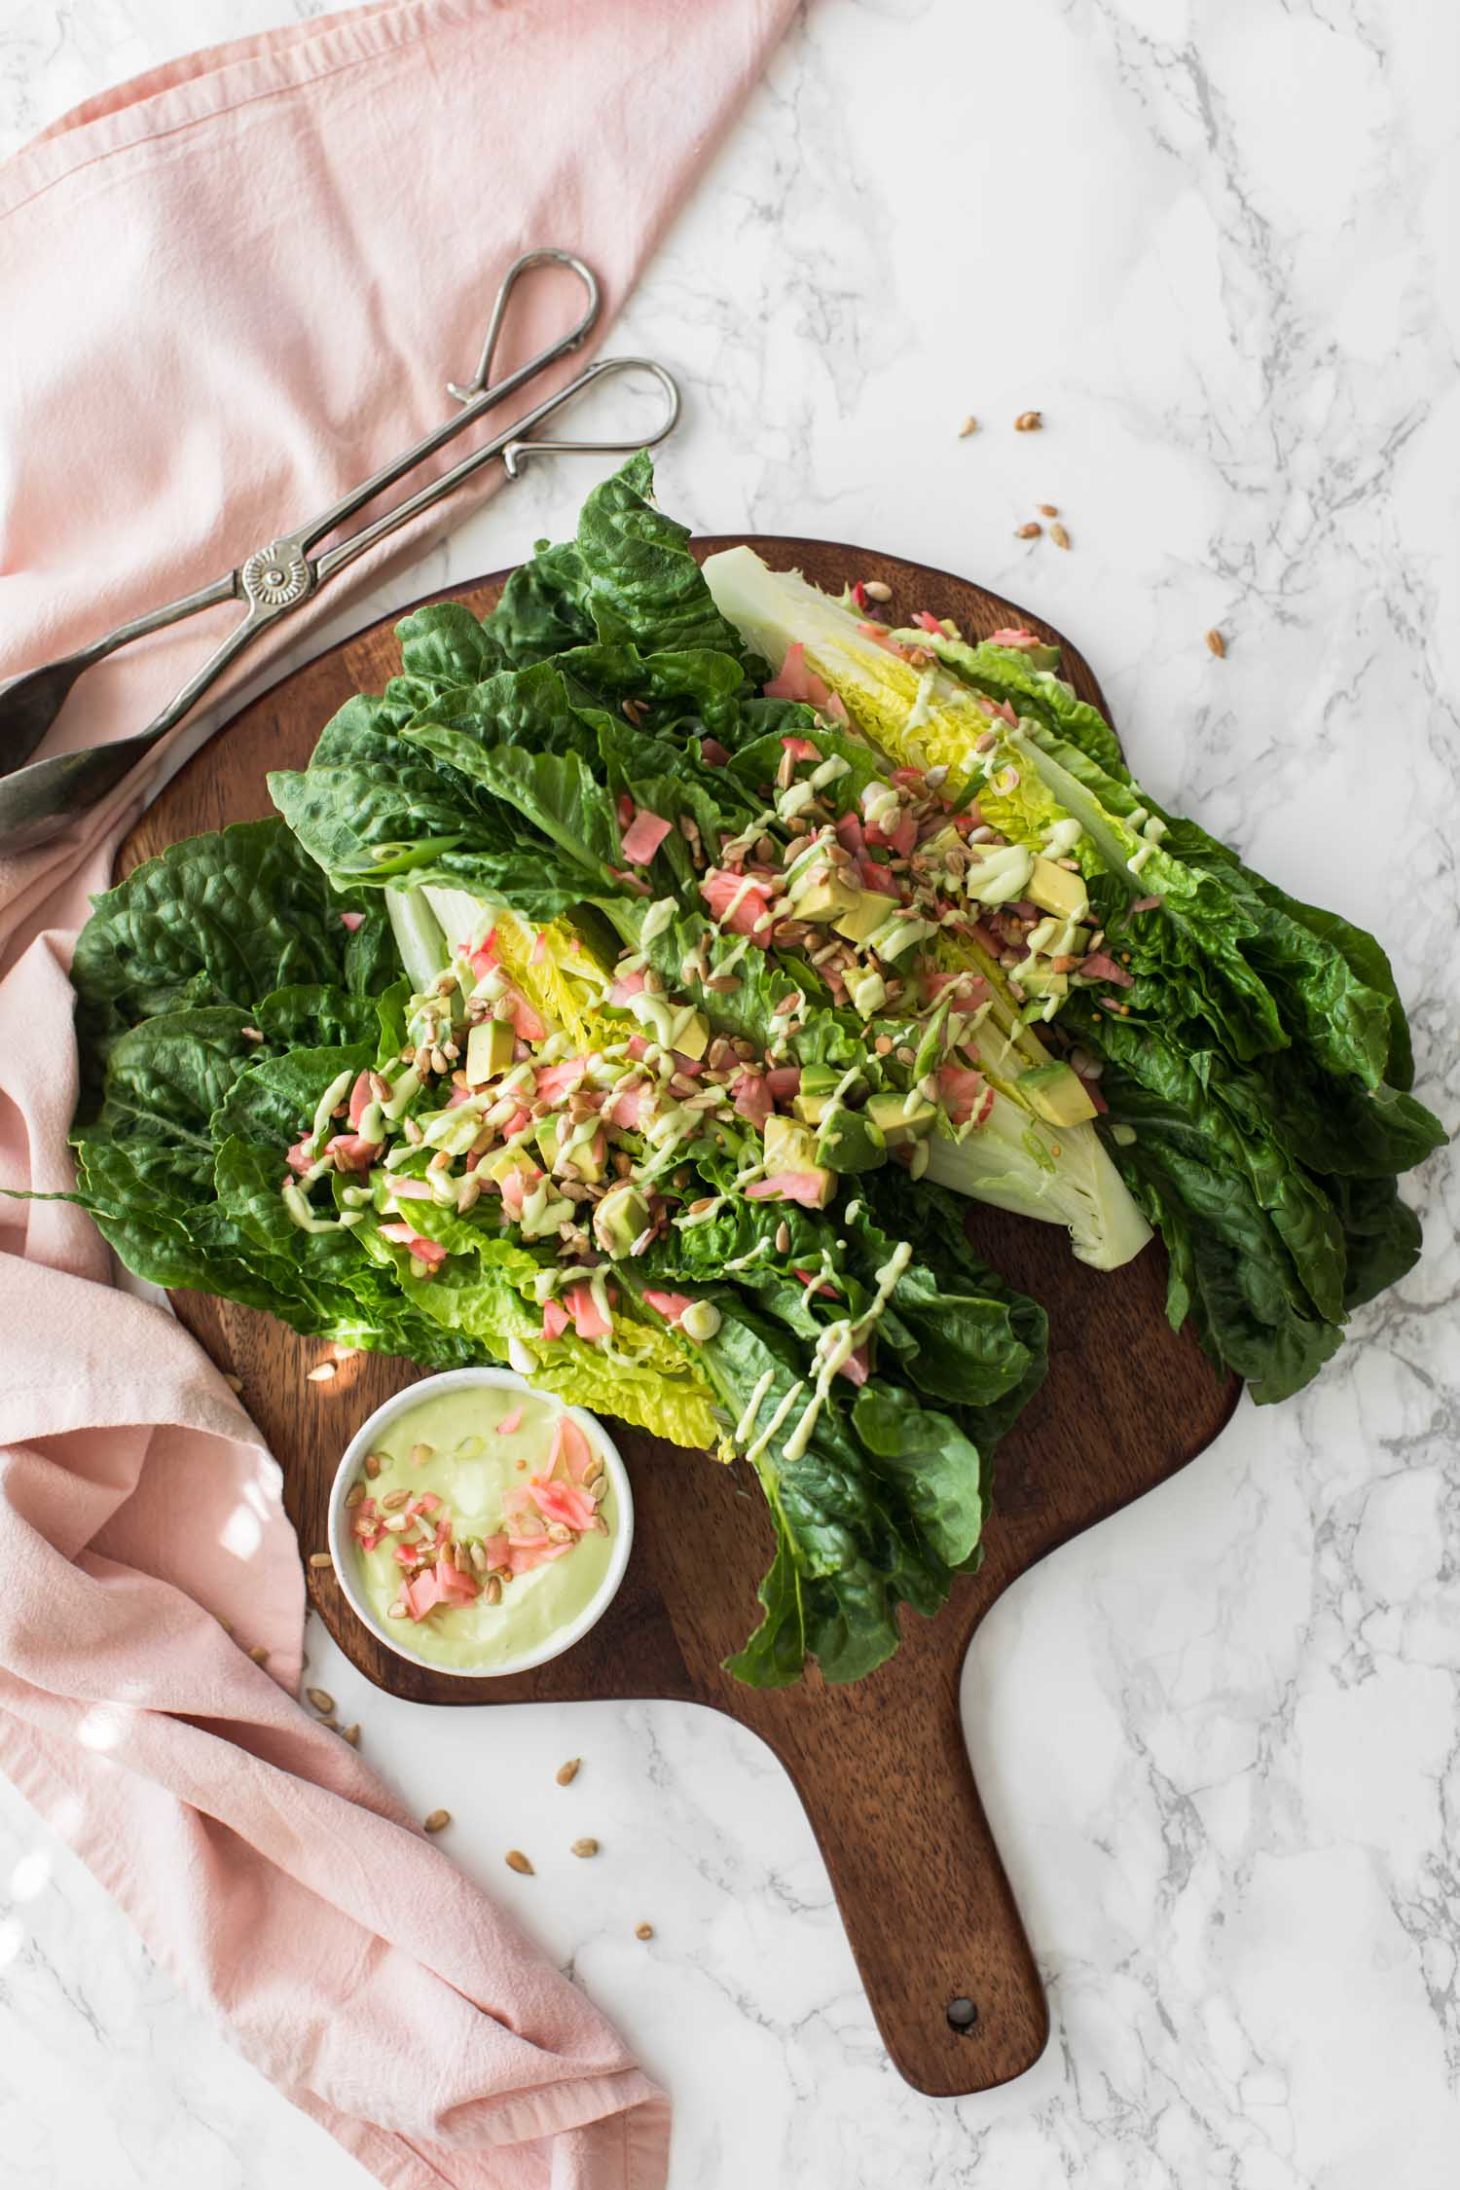 Avocado Romaine Wedge Salad with Pickled Radish with Sunflower Seeds | Naturally Ella